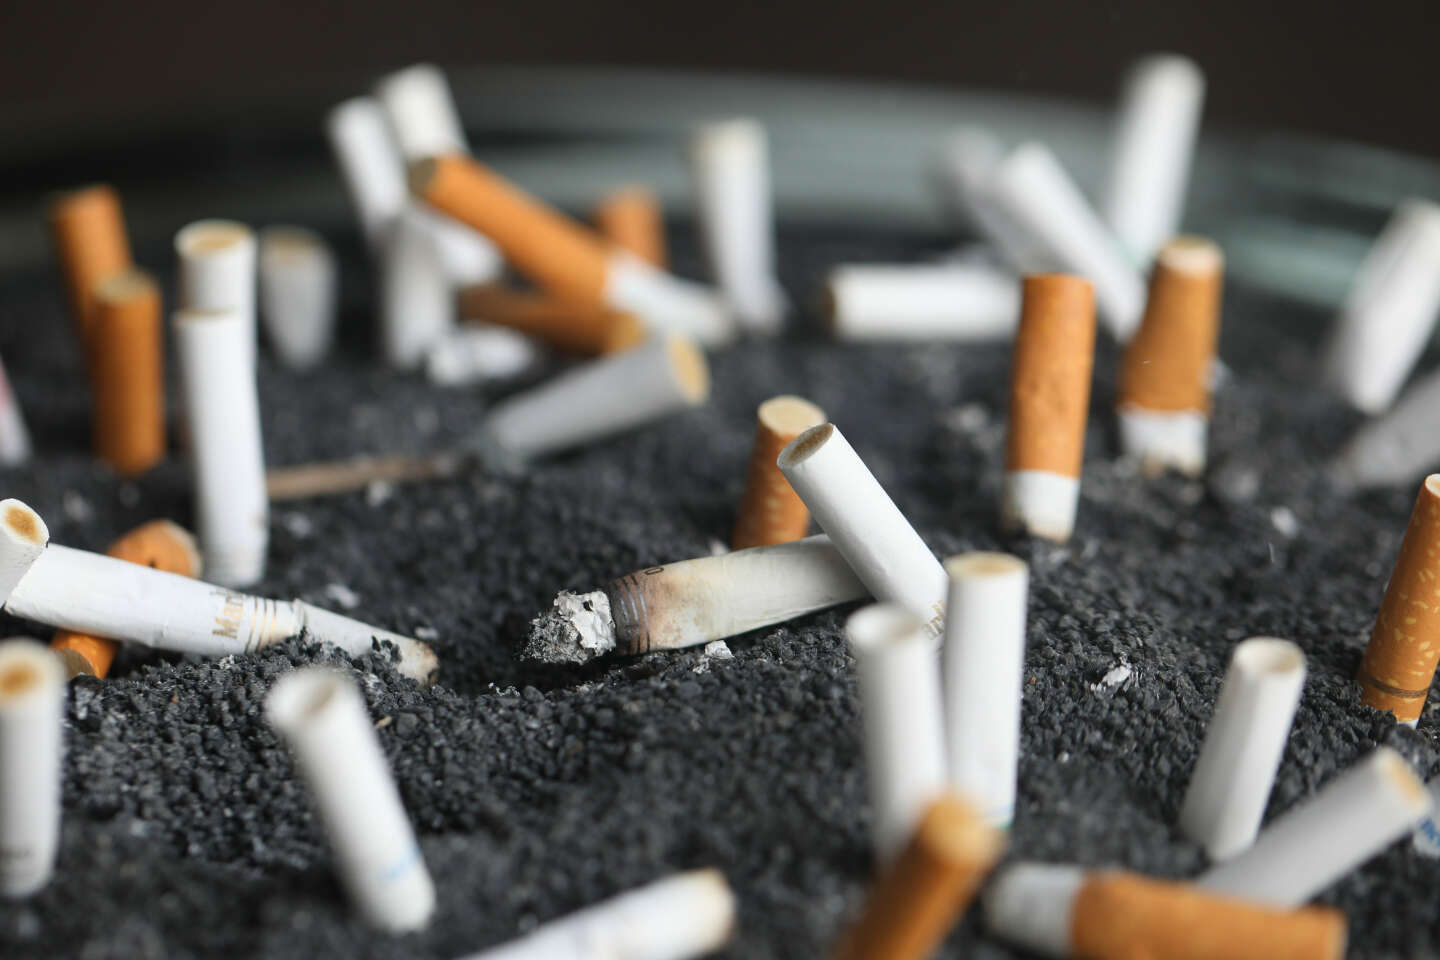 With one in four adults who smoke daily, smoking remains stable in France